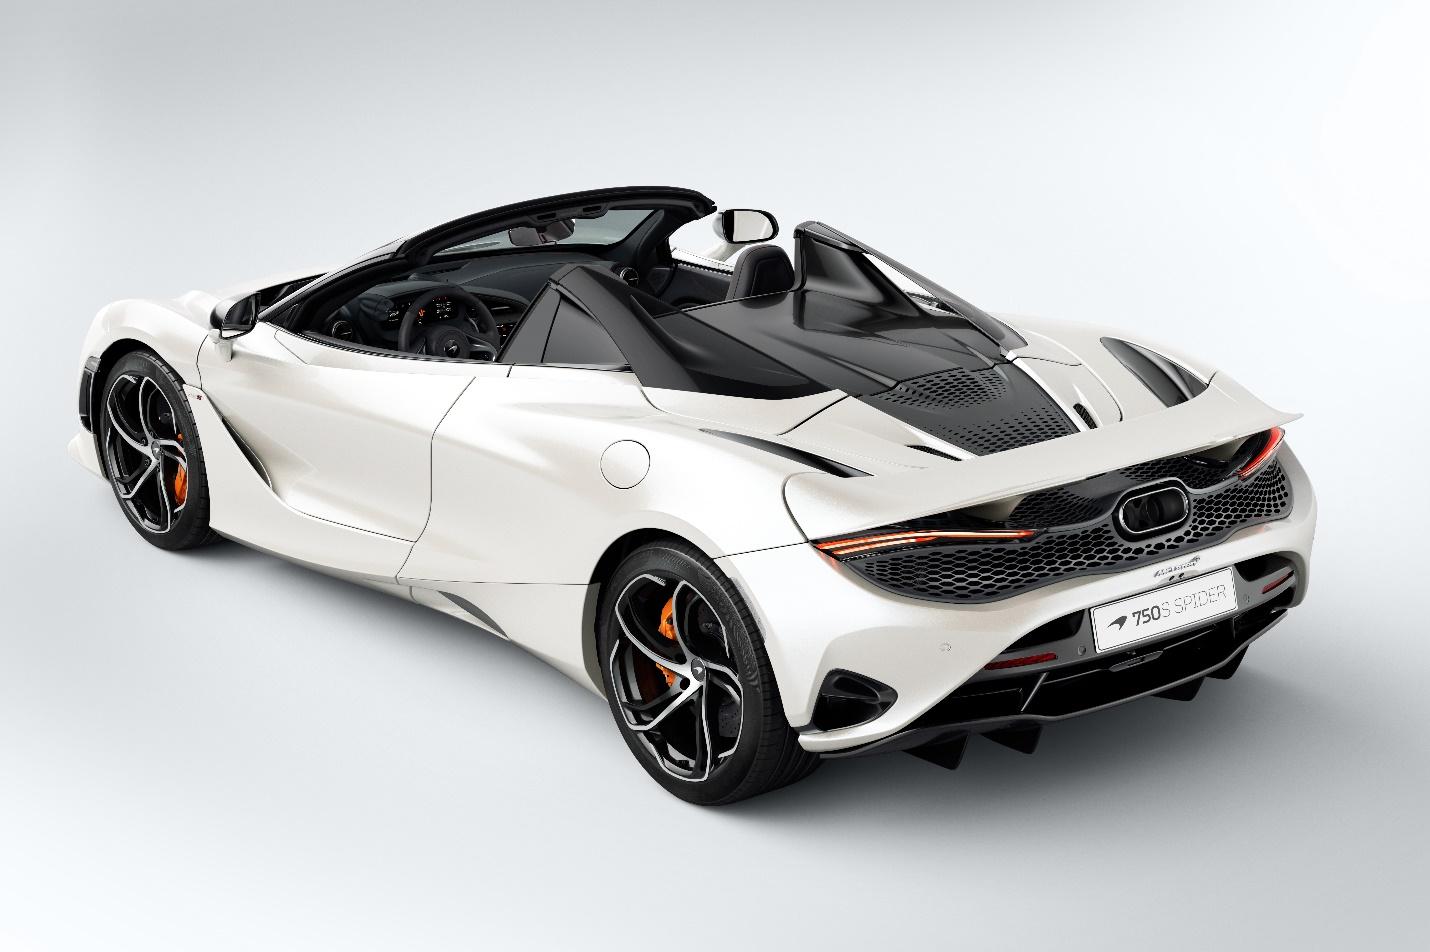 A white sports car with black roof

Description automatically generated